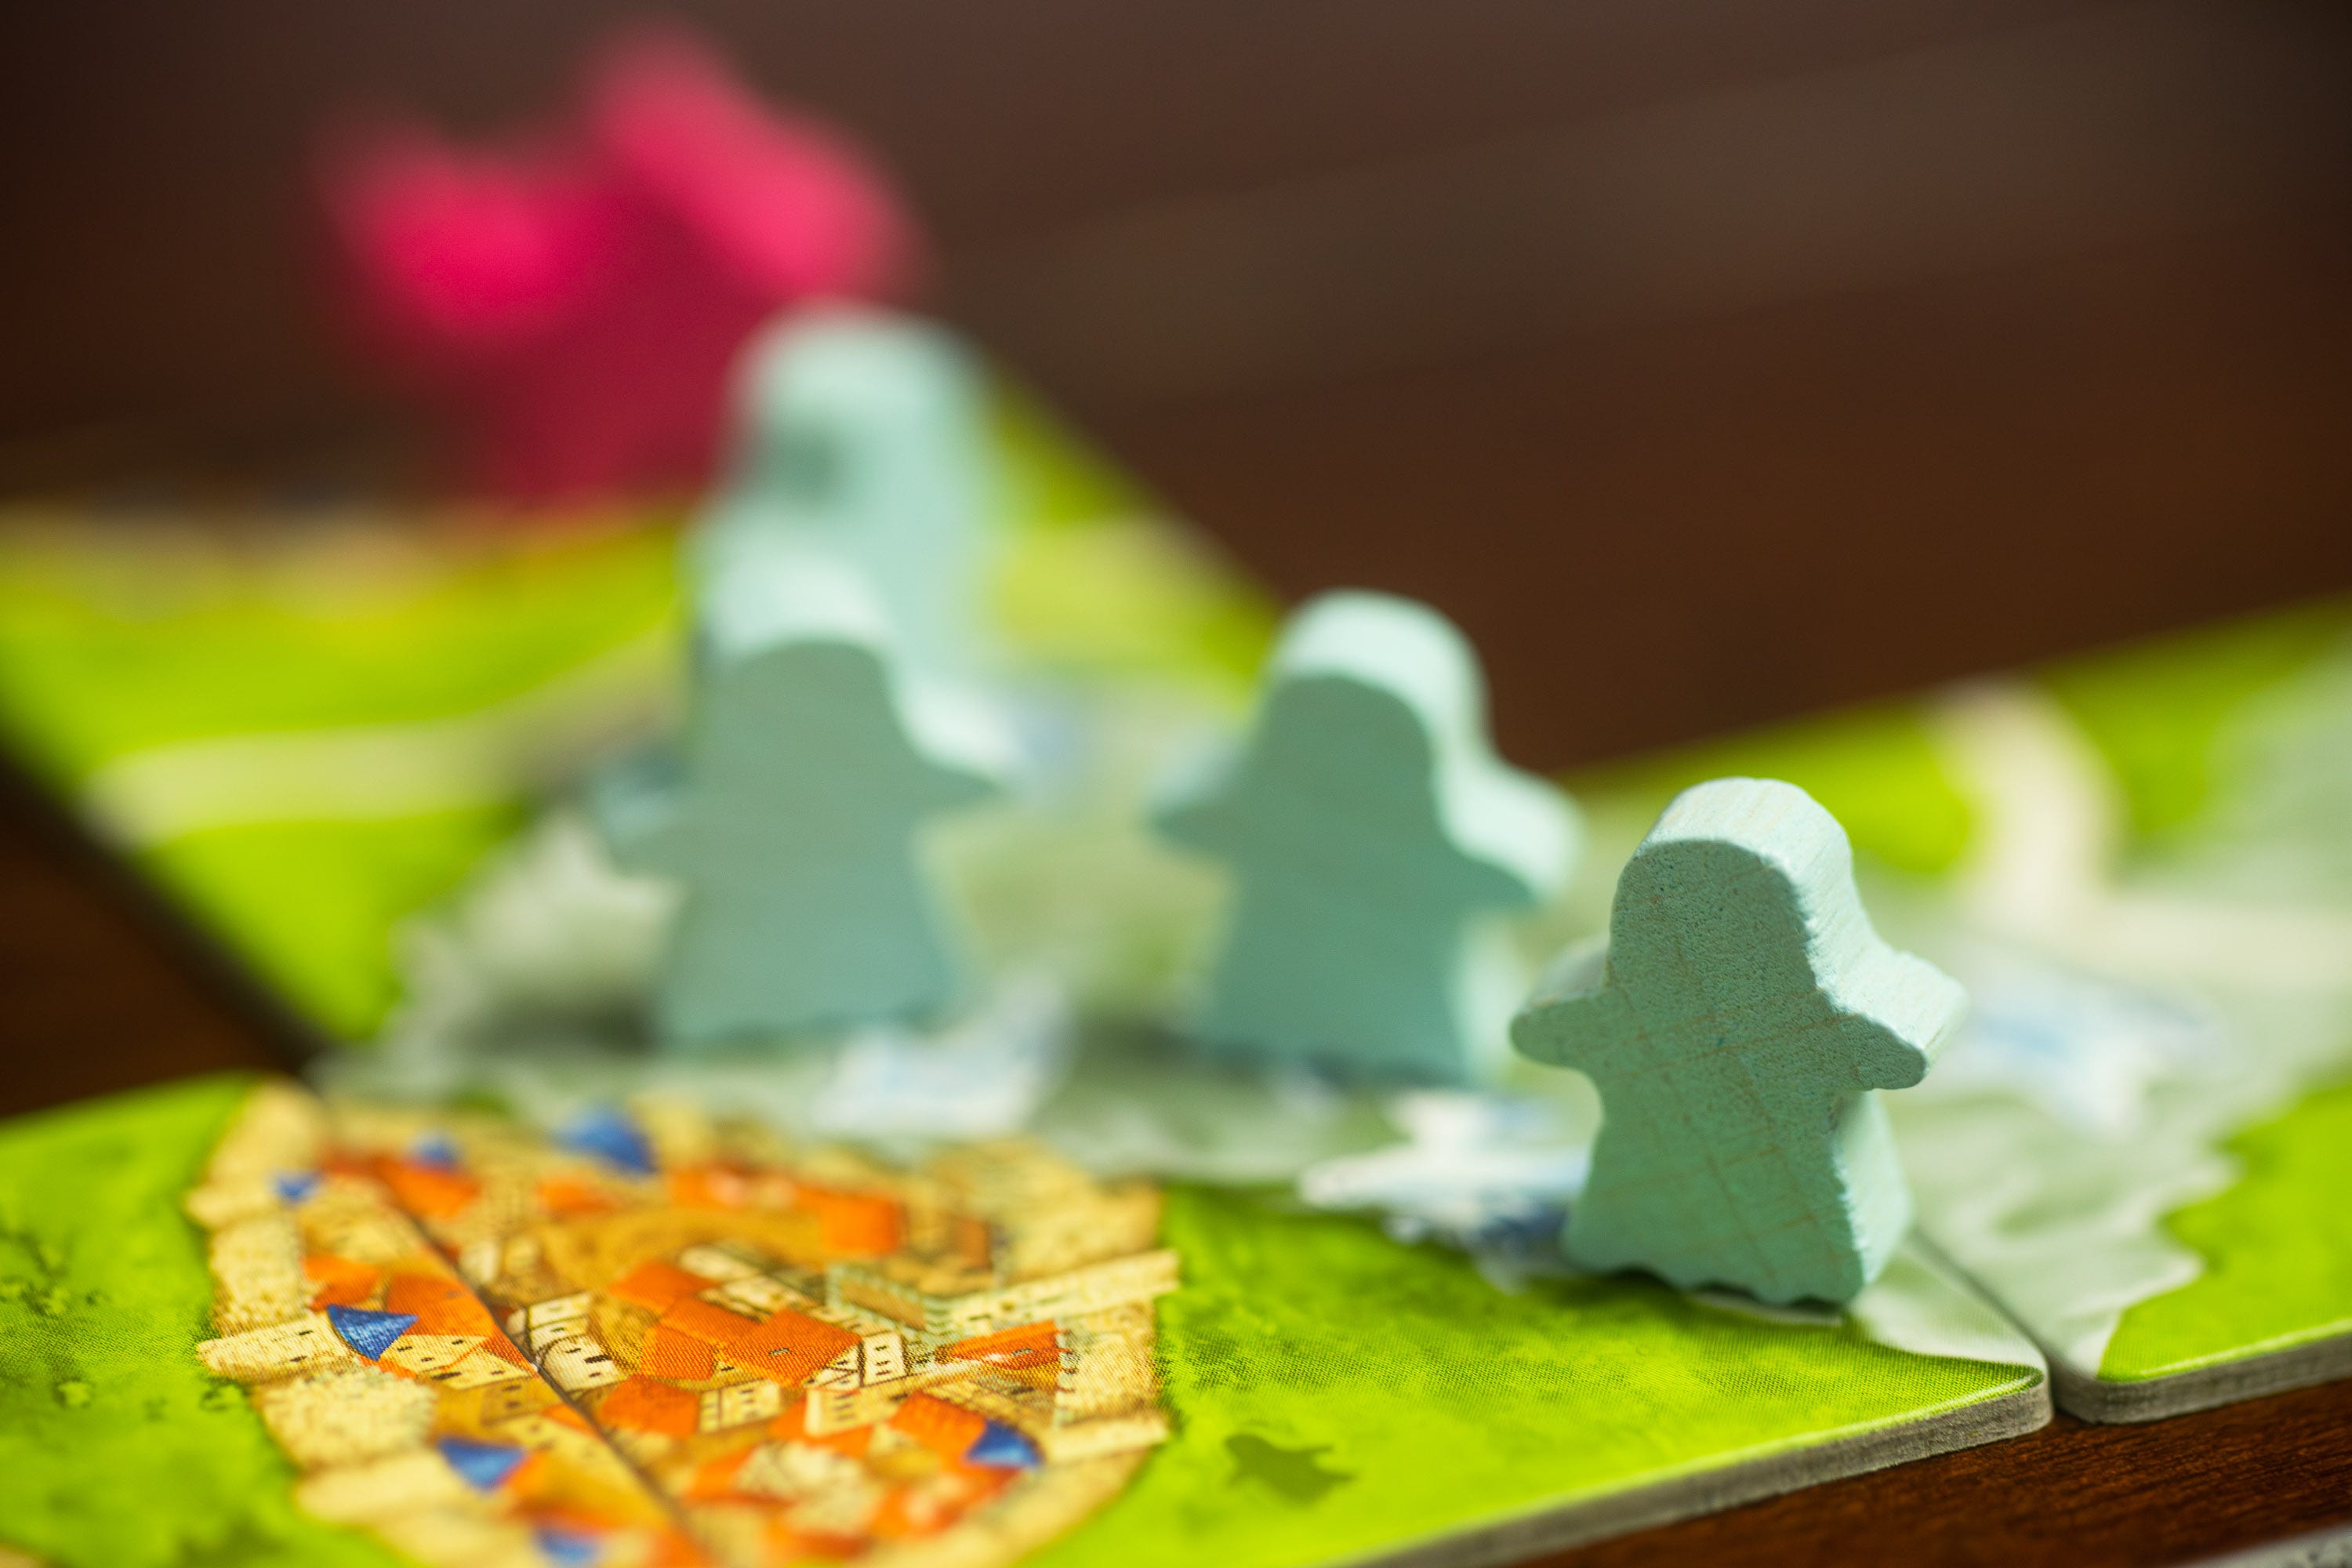 Issue 17: History of the Meeple - by Matt Montgomery